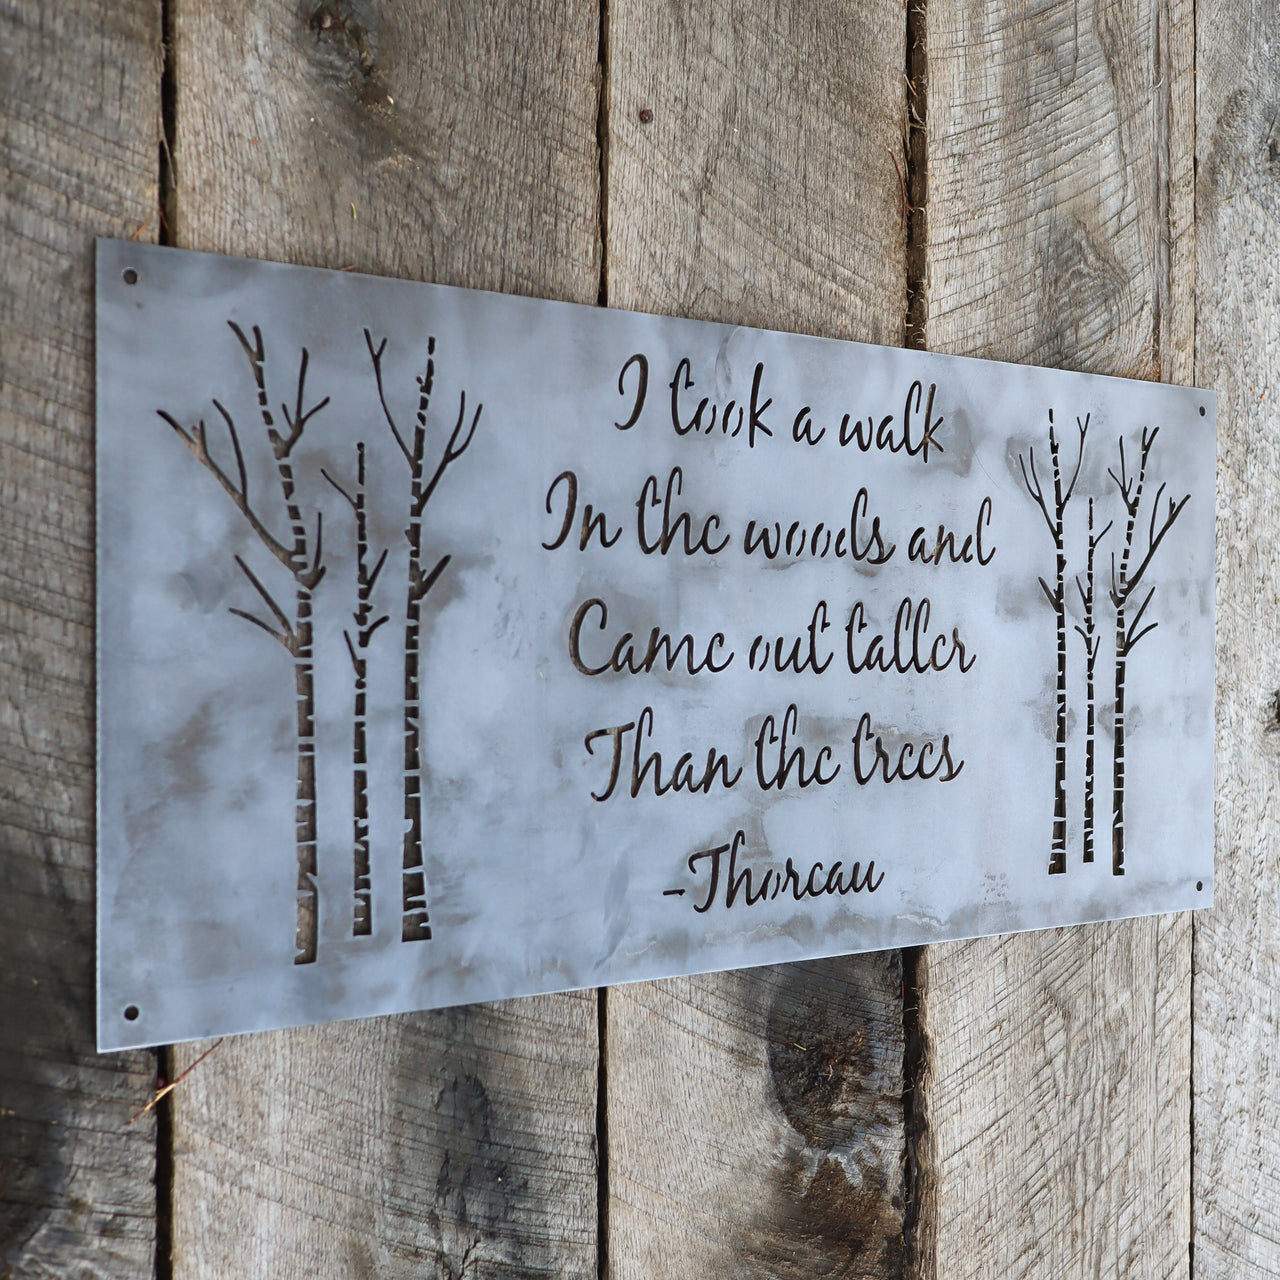 I Took a Walk in the Woods Metal Sign - Rustic Wilderness Cabin Decor - Henry David Thoreau Quote Wanderlust Wall Art